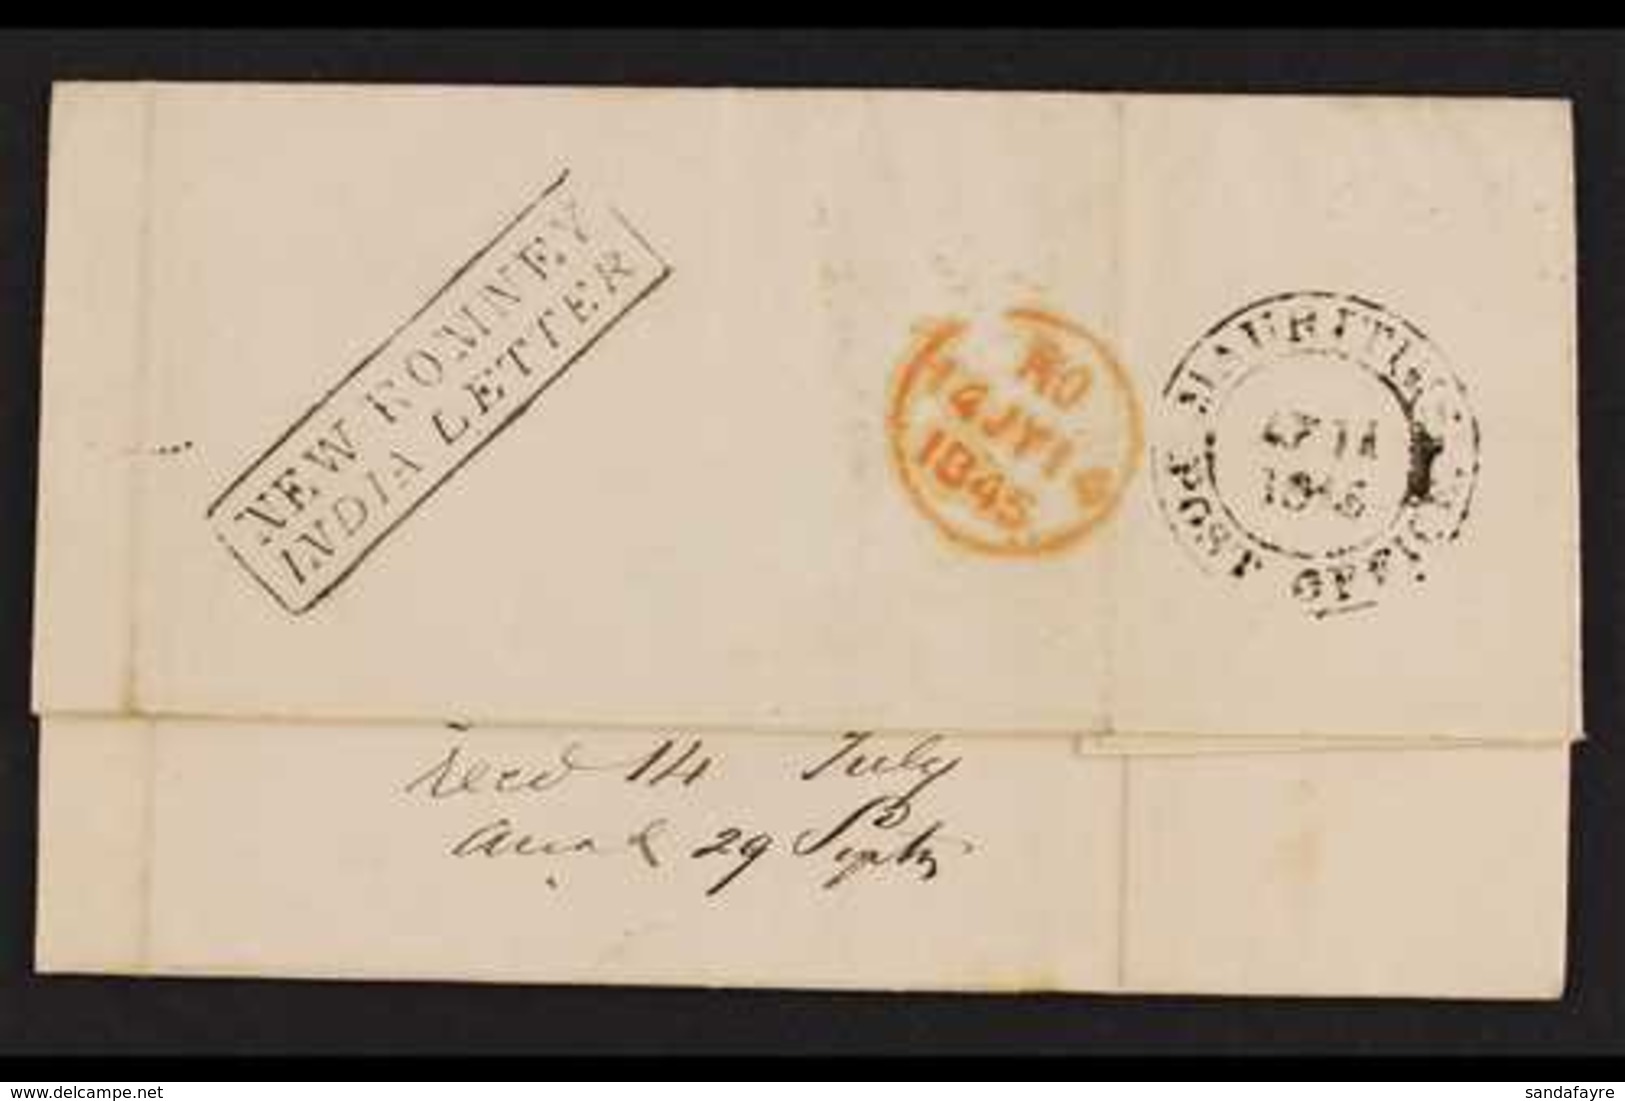 1845  (April) Entire Letter "Pr. John King" To Huth In London, Showing Black MAURITIUS POST OFFICE Cds, And Very Fine Bo - Mauritius (...-1967)